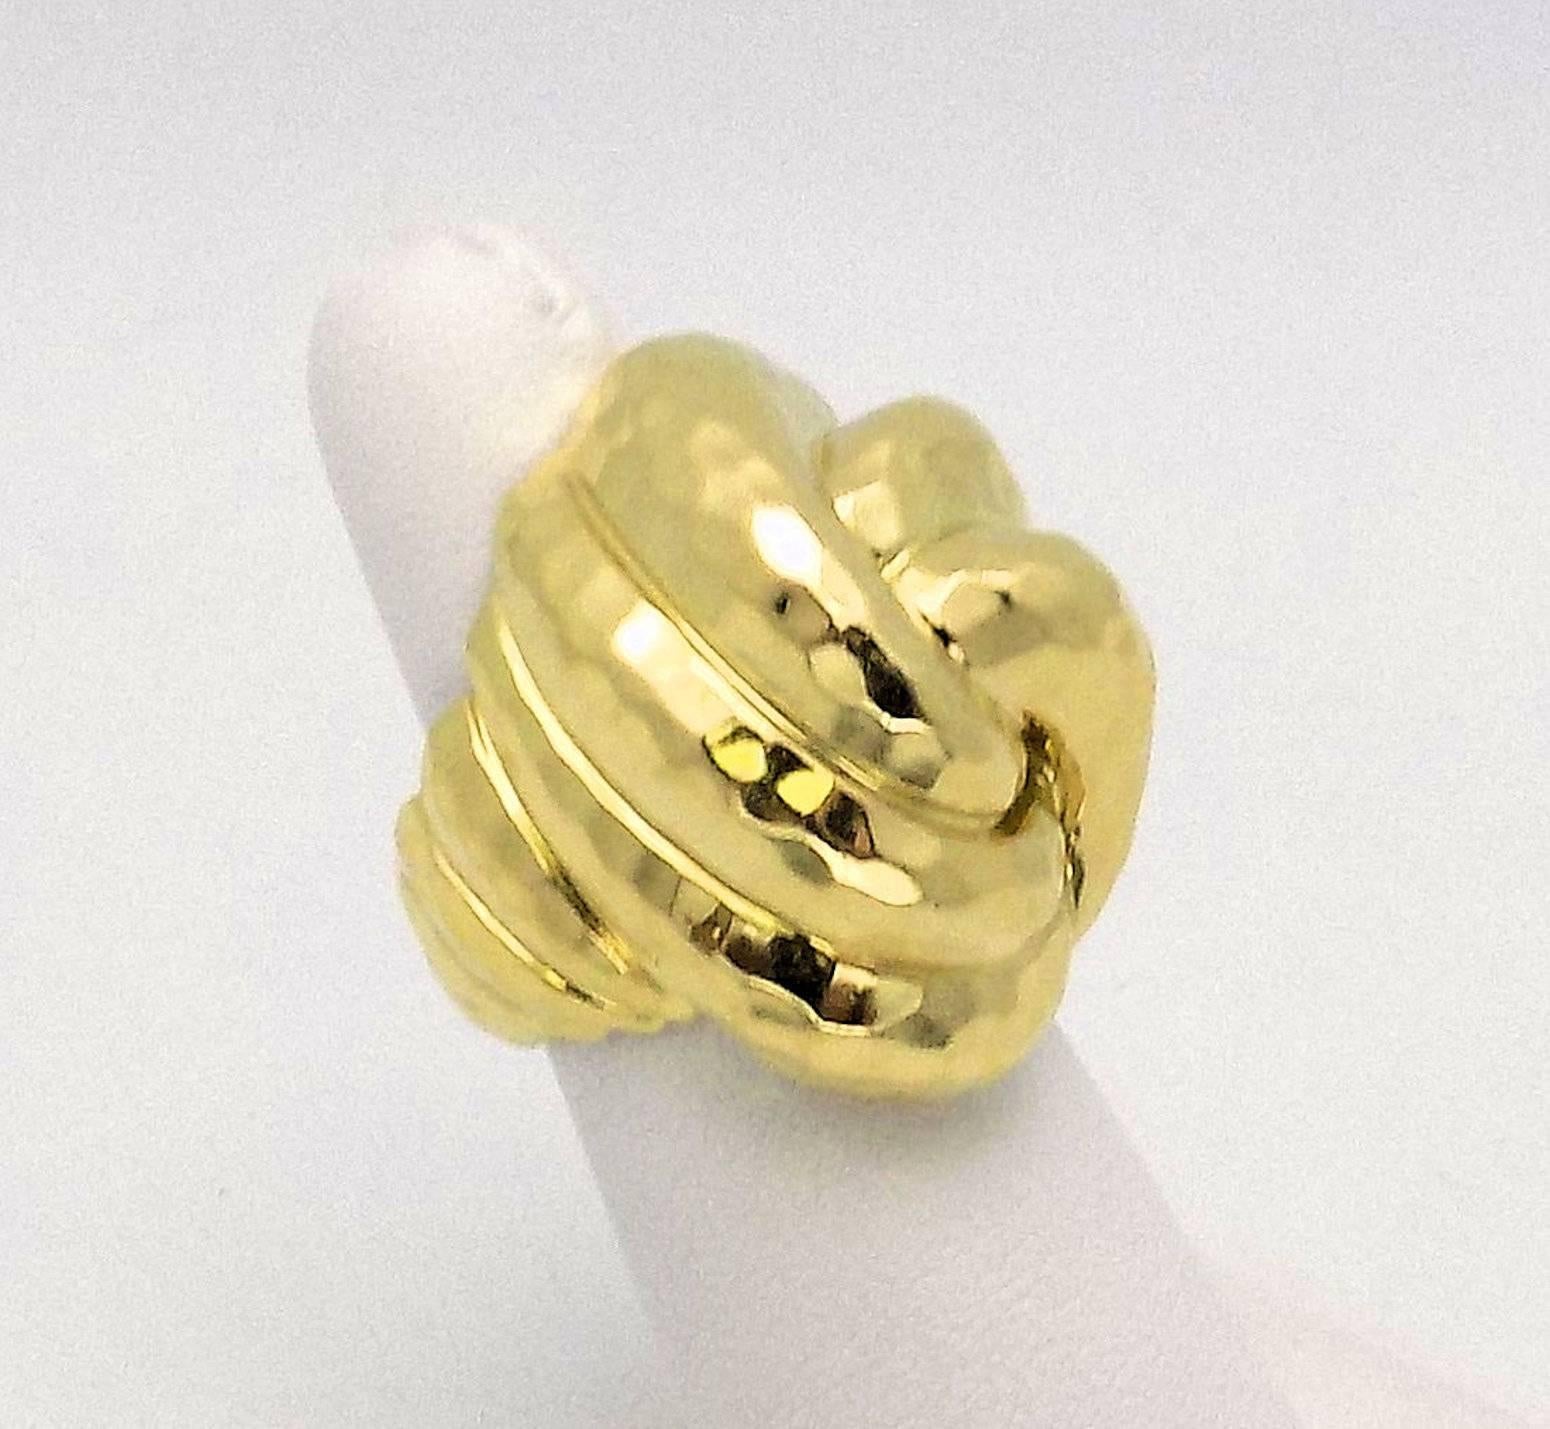 Lovely 18 Karat yellow gold ring by famed maker, Henry Dunay.  One of his most sought-after ring styles, high dome double knot style.  Shank is lines with sizing shank, fits 6.5 - 7.  This is the one everyone wants!! 16.4 dwt. Style B 1060.